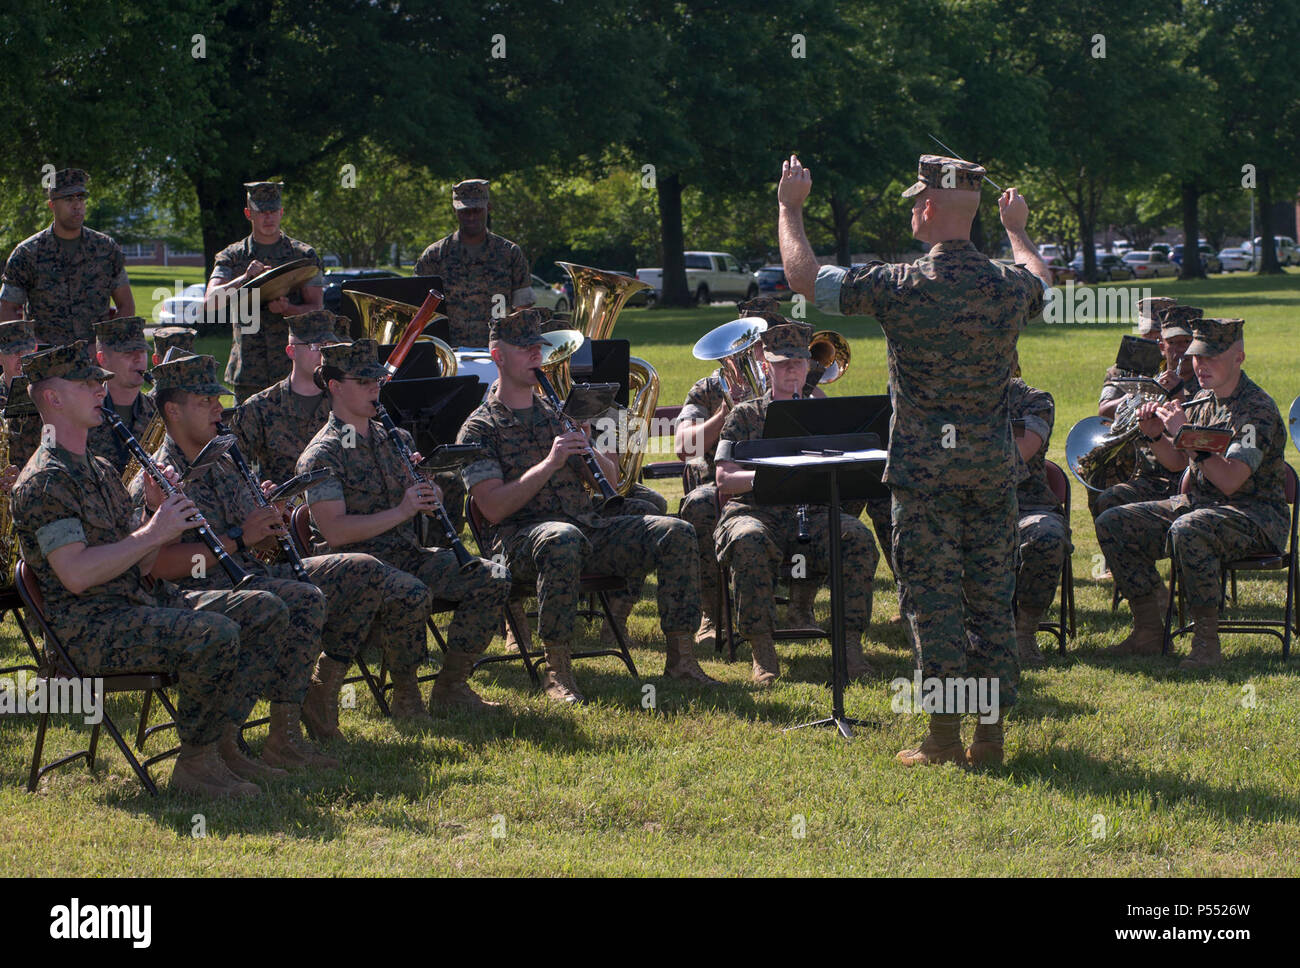 The U.S. Marine Corps Quantico Band, performs during the Centennial Celebration Ceremony at Lejeune Field, Marine Corps Base Quantico (MCBQ), Va., May 10, 2017. The event commemorates the founding of MCBQ in 1917, and consisted of performances by the U.S. Marine Corps Silent Drill Platoon and the U.S. Marine Drum & Bugle Corps. Stock Photo